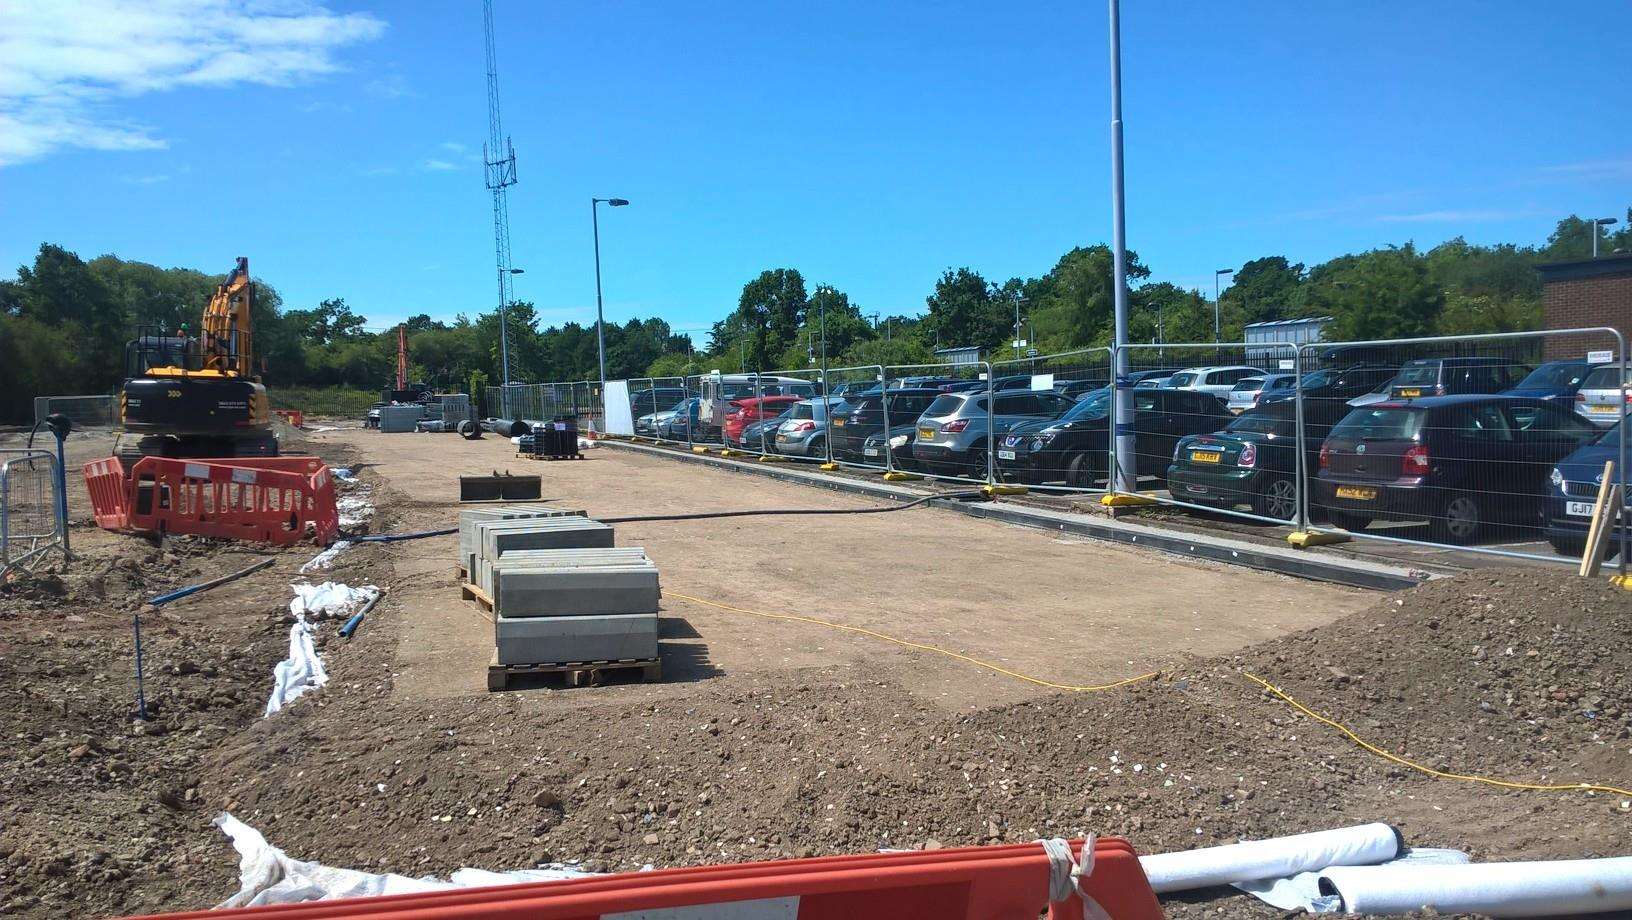 Work to add 300 extra car parking spaces at Staplehurst station is underway (3612501)